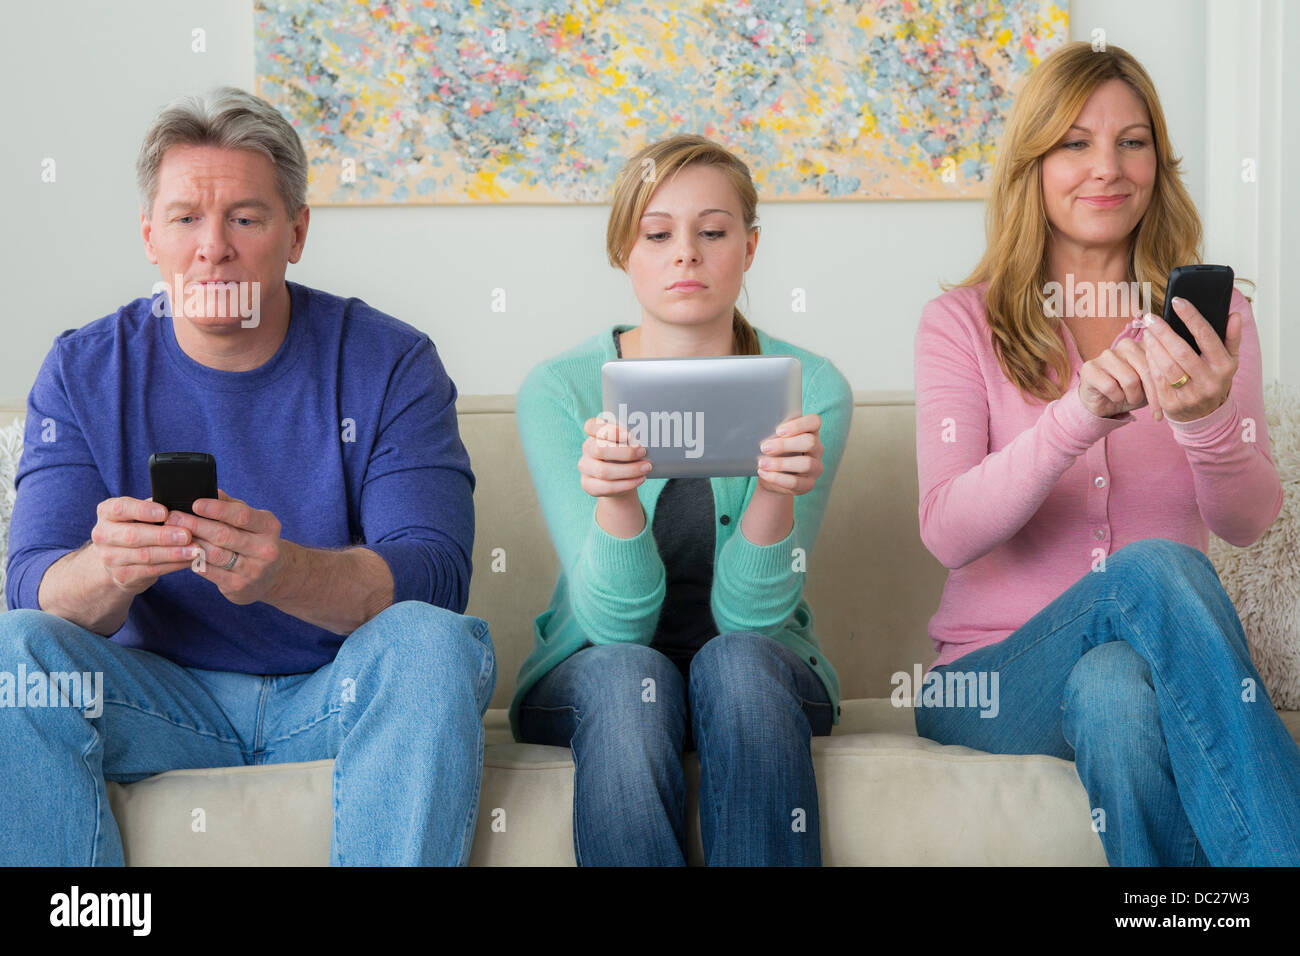 Family with teenage girl using communication devices Stock Photo